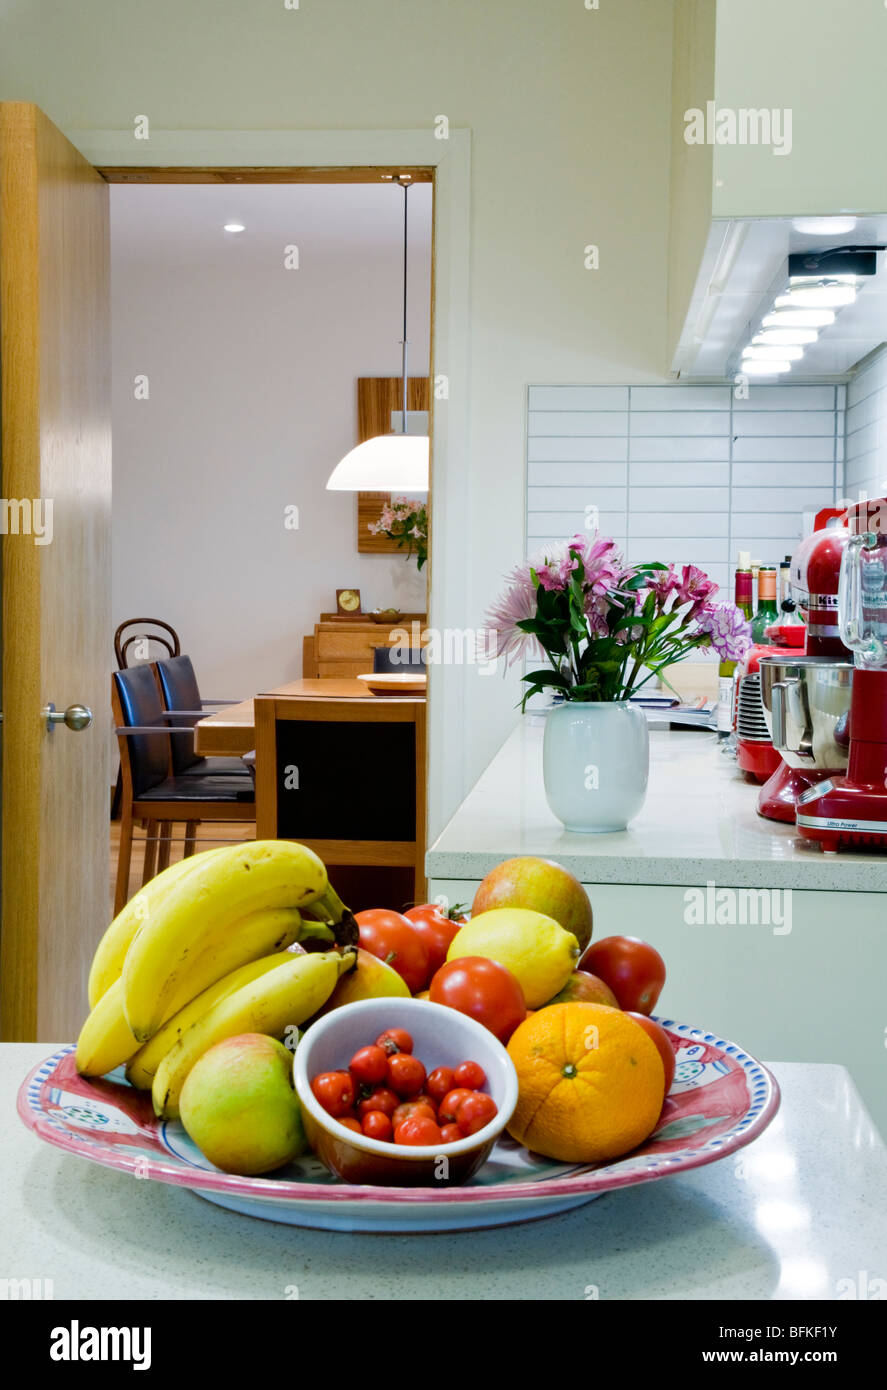 Bowl of fruit and tomatoes on a modern kitchen worktop Stock Photo